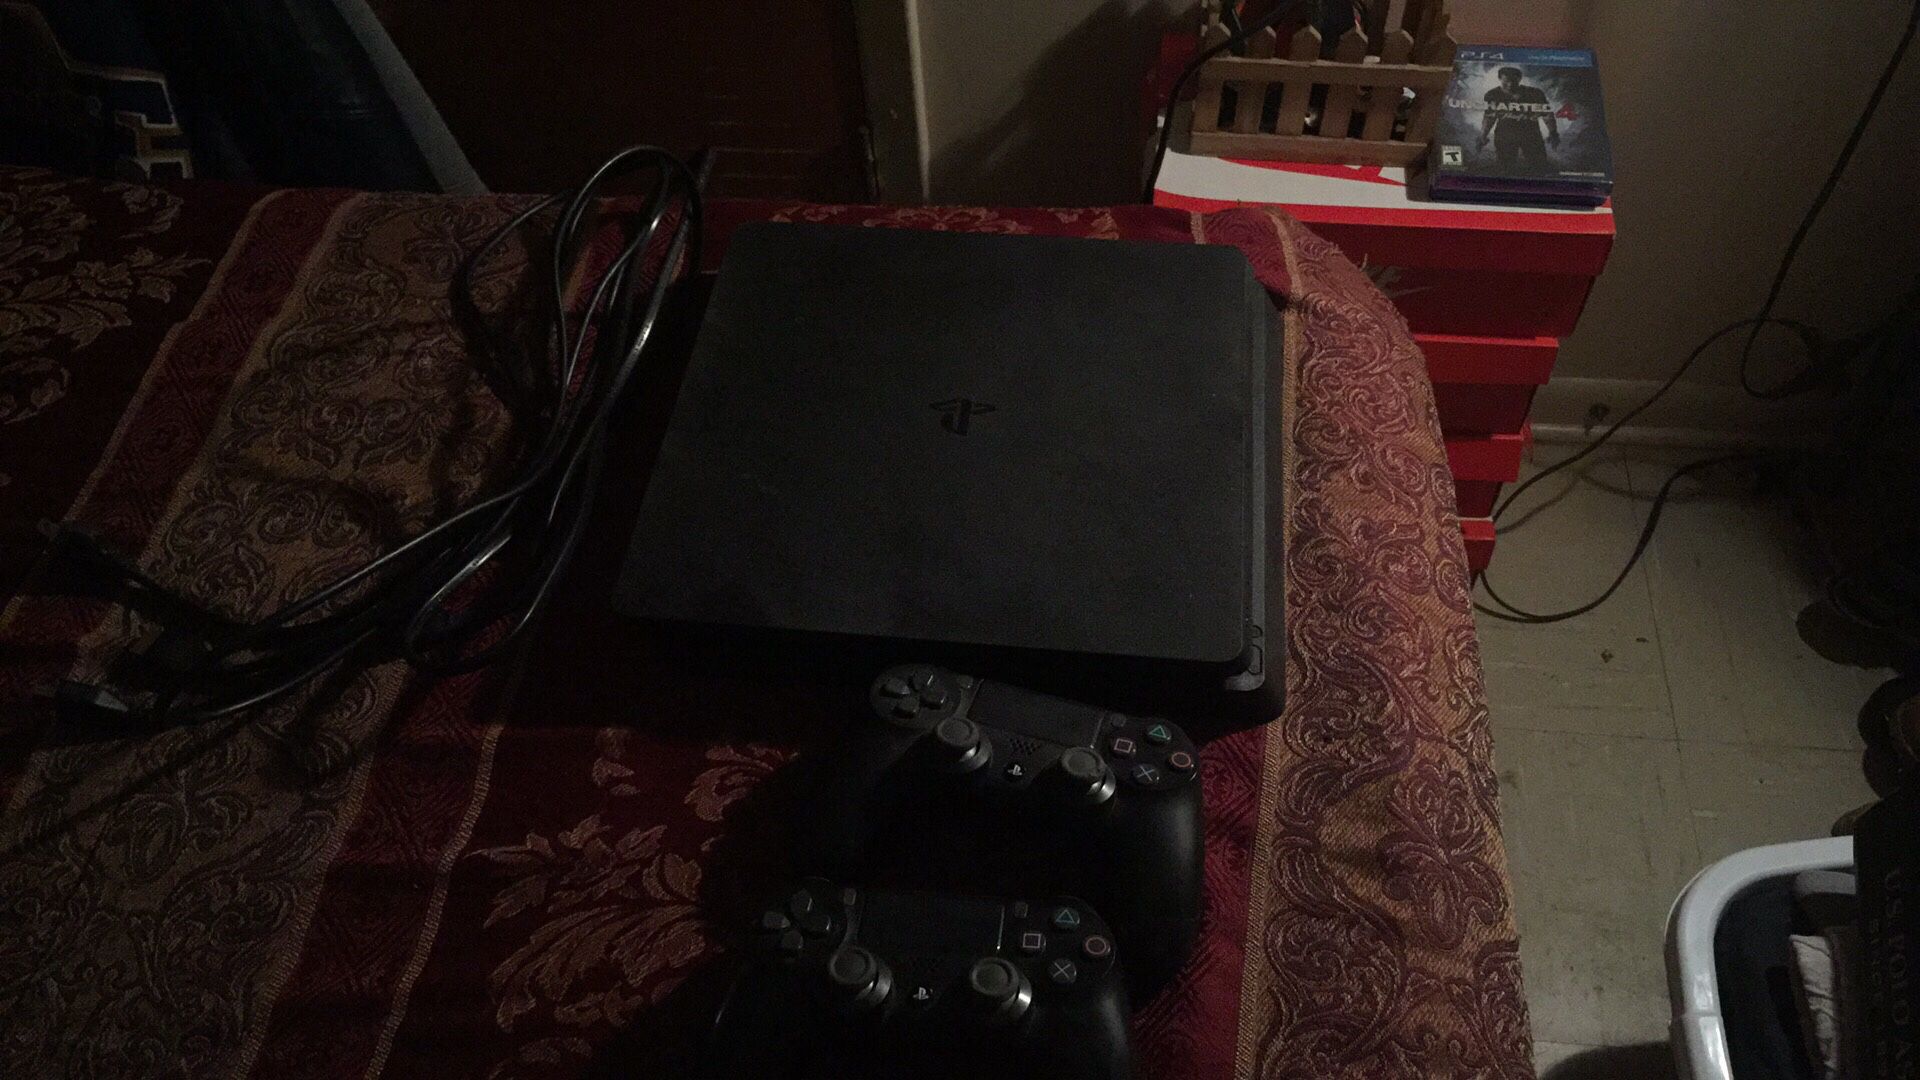 PS4 with both sticks